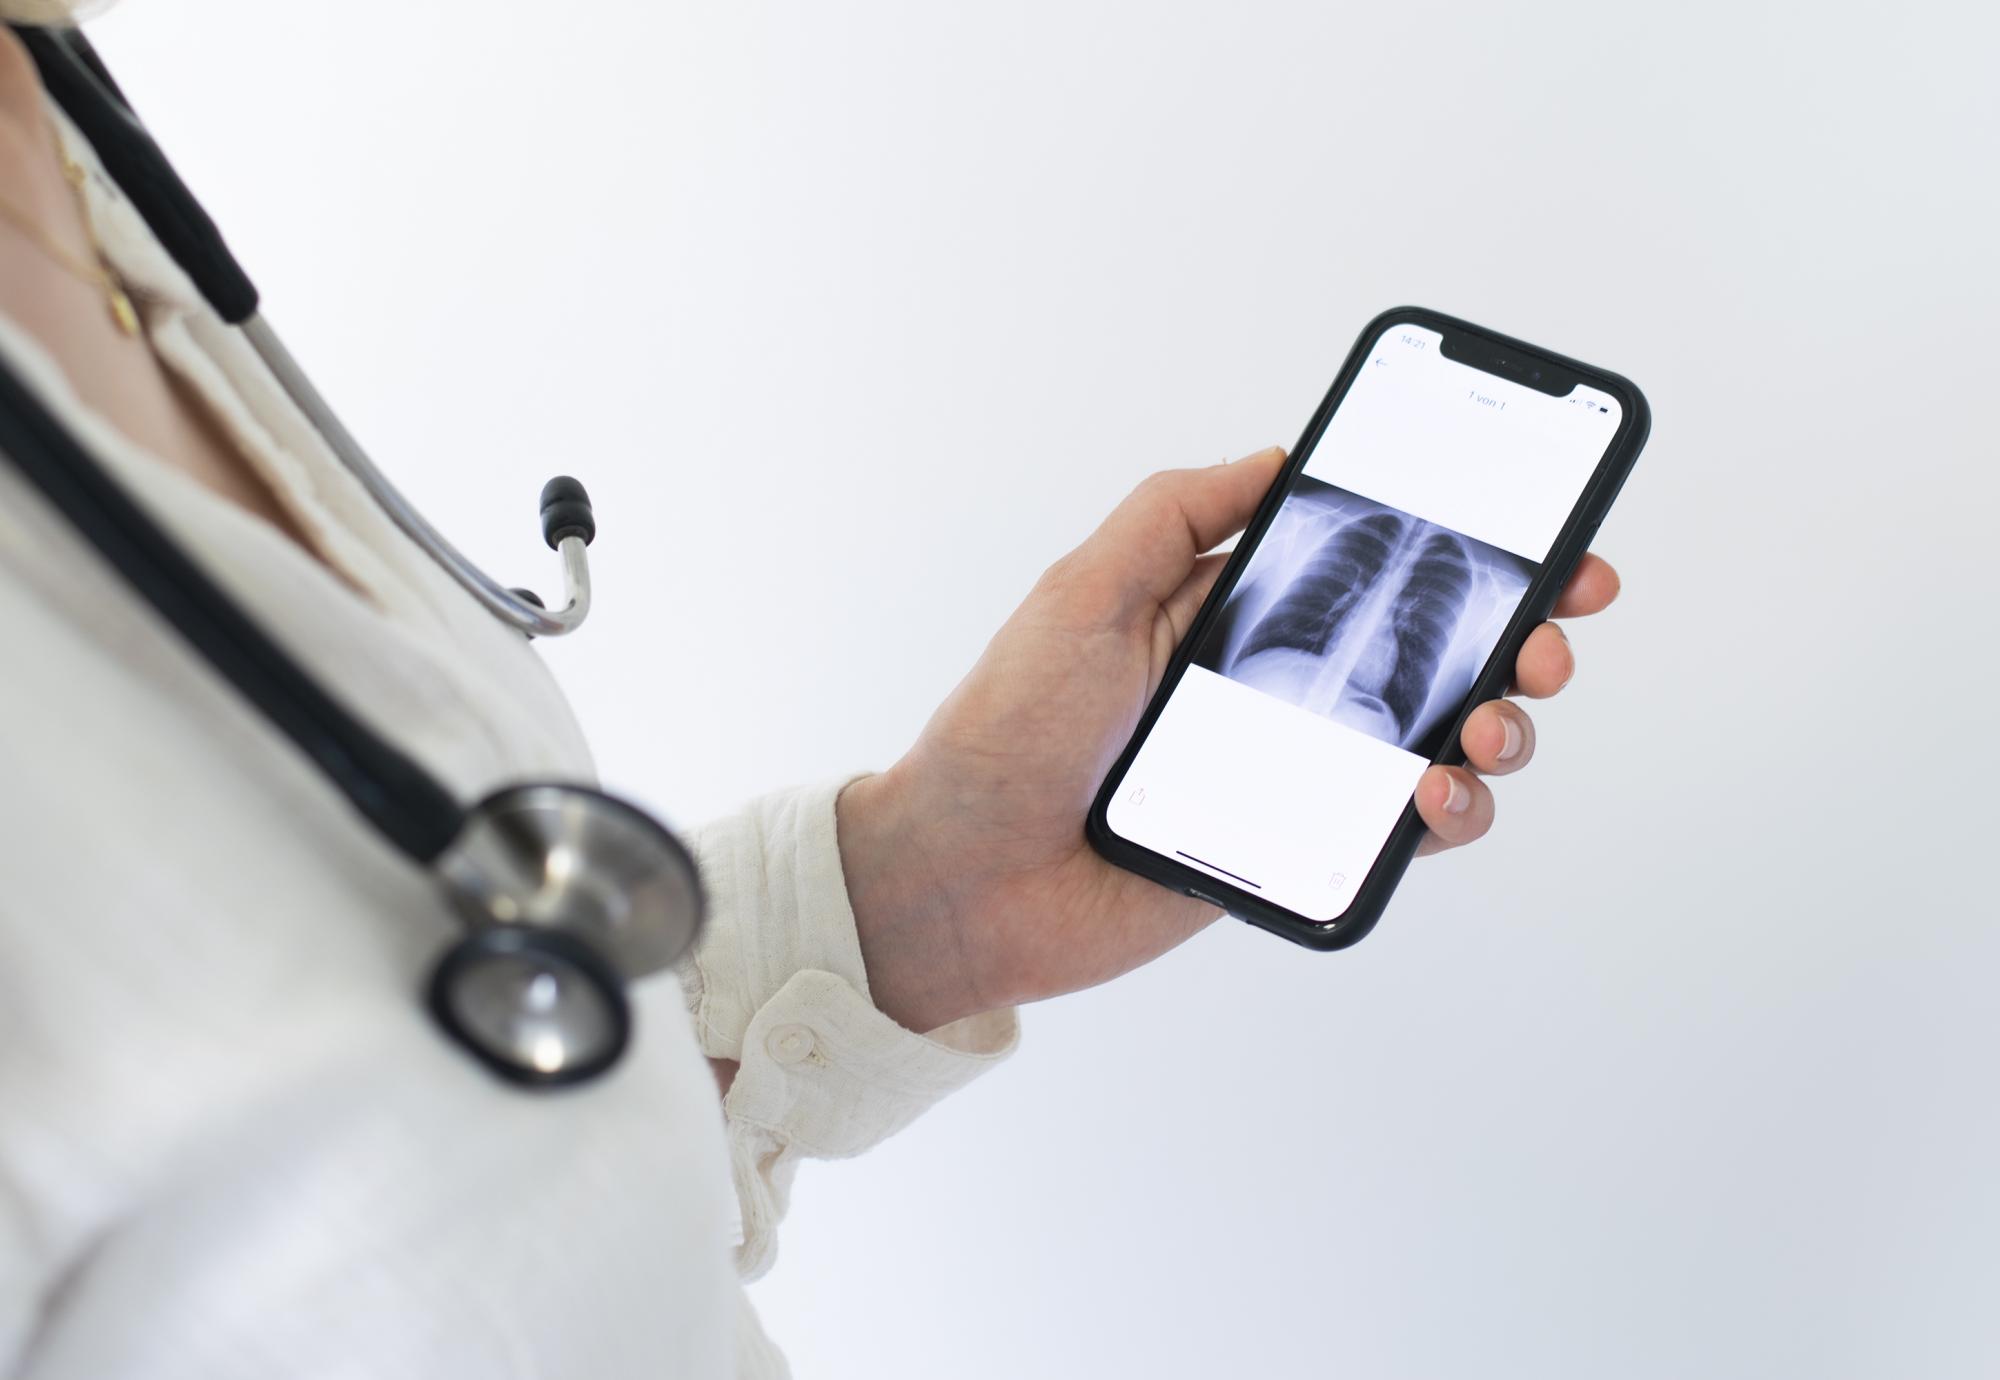 X-ray on phone